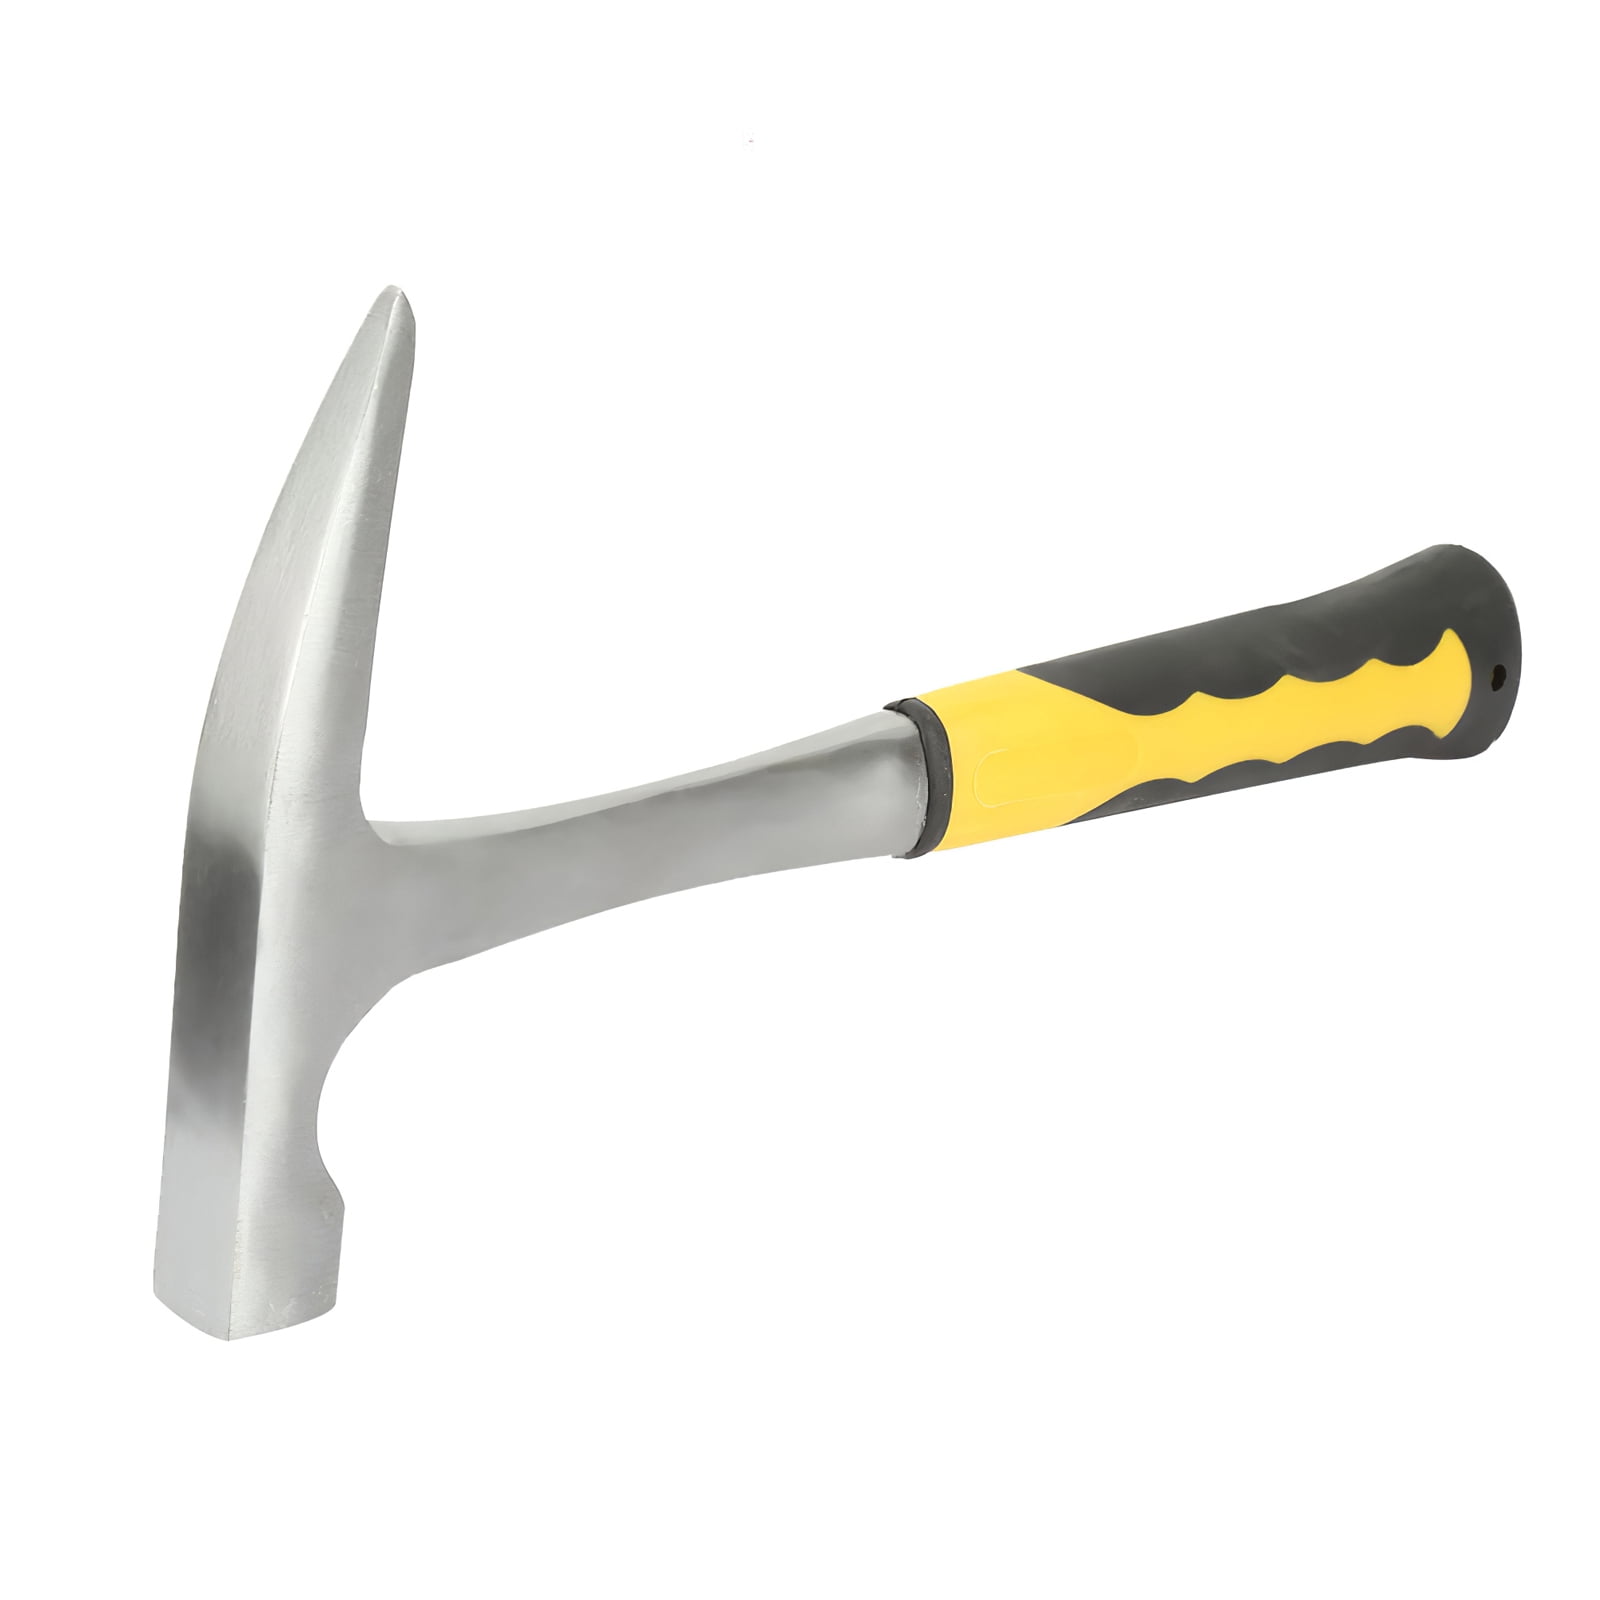 Brick Hammer Geological Hammer Geological Survey for Home Worker Construction Site High Hardness Rubber Handle High Carbon Steel Flat Mouth Hammer